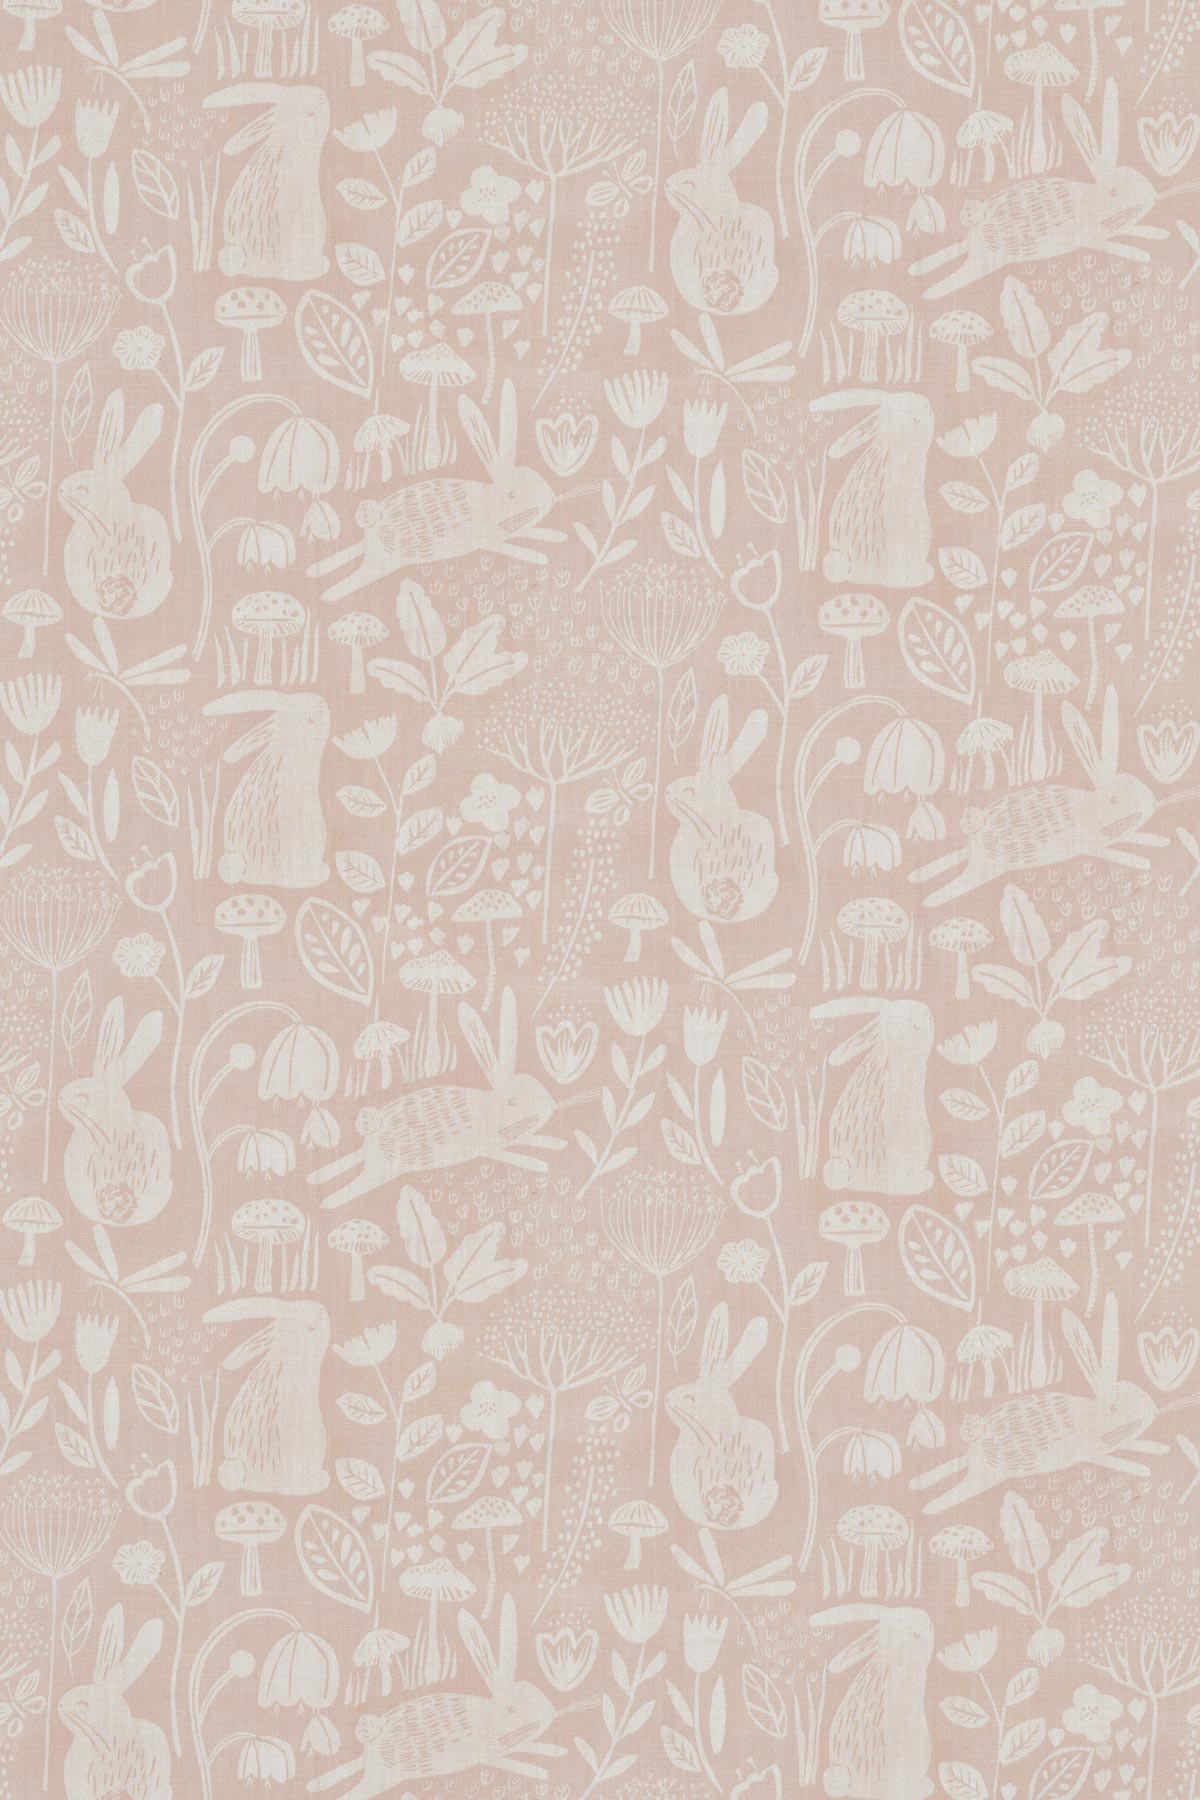 Into the meadow Fabric - Powder - by Harlequin